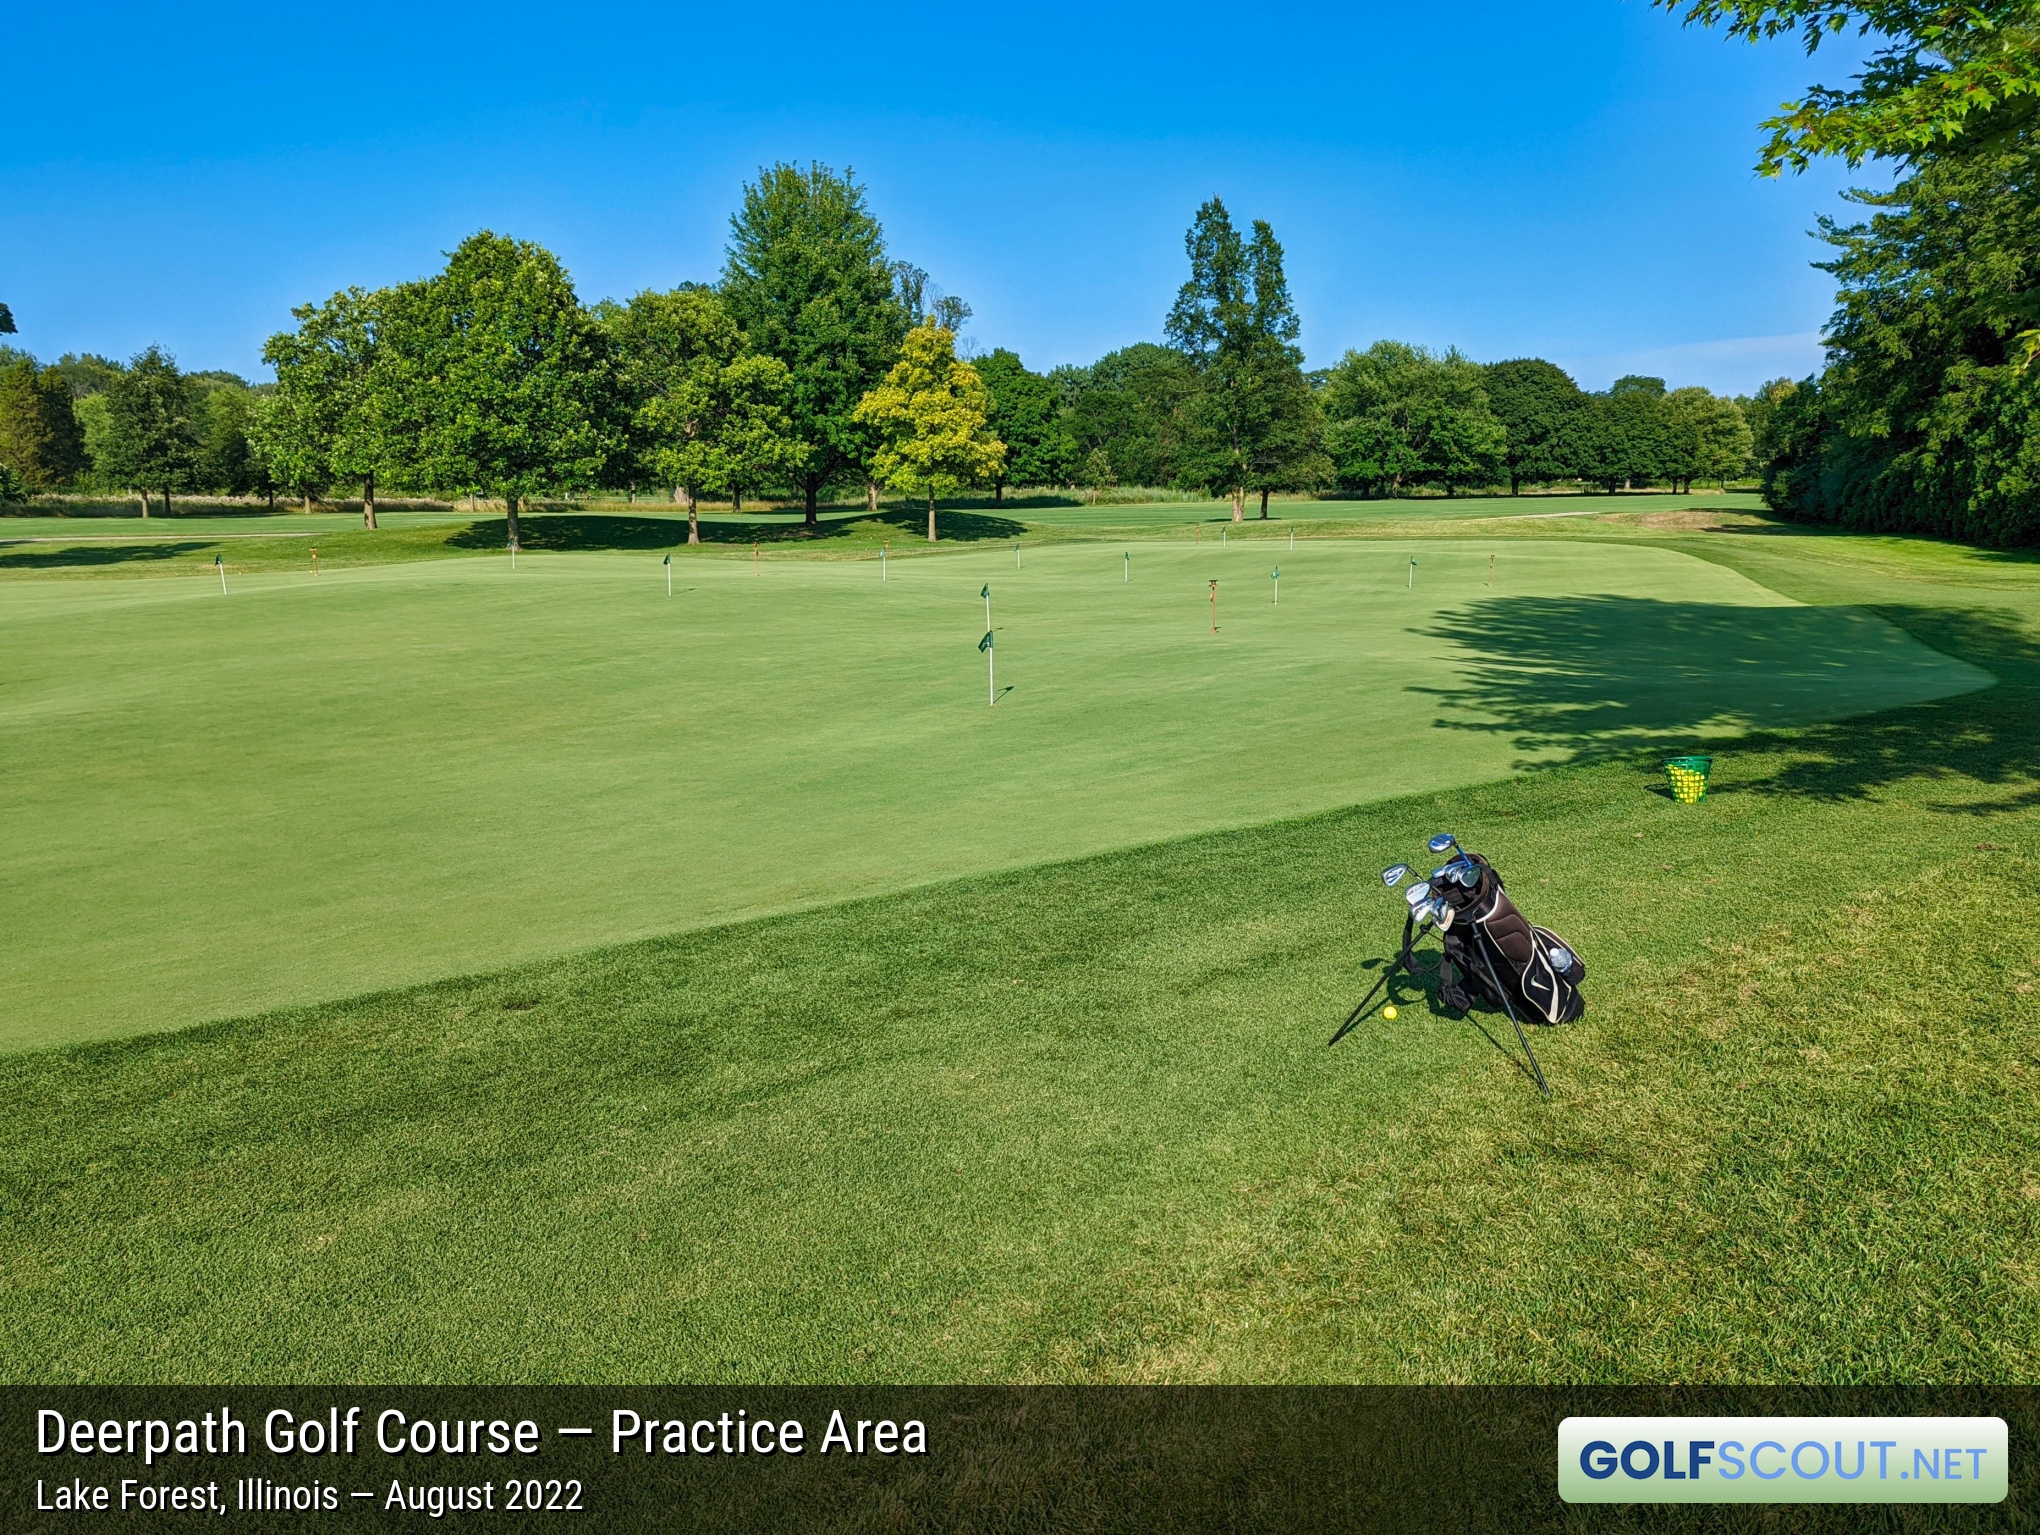 Photo of the practice area at Deerpath Golf Course in Lake Forest, Illinois. 